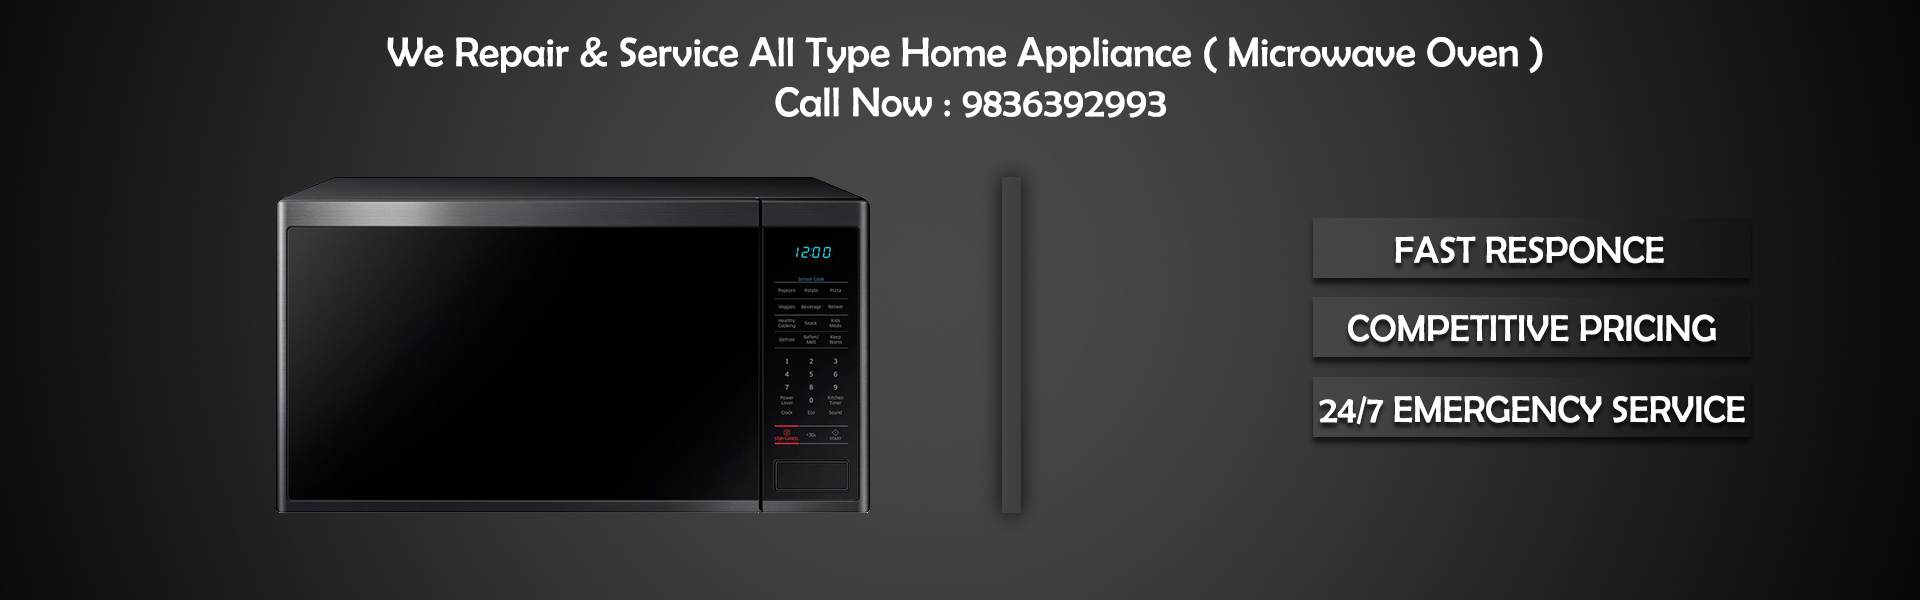 Customer Care North Microwave Oven Repair & Services Banner